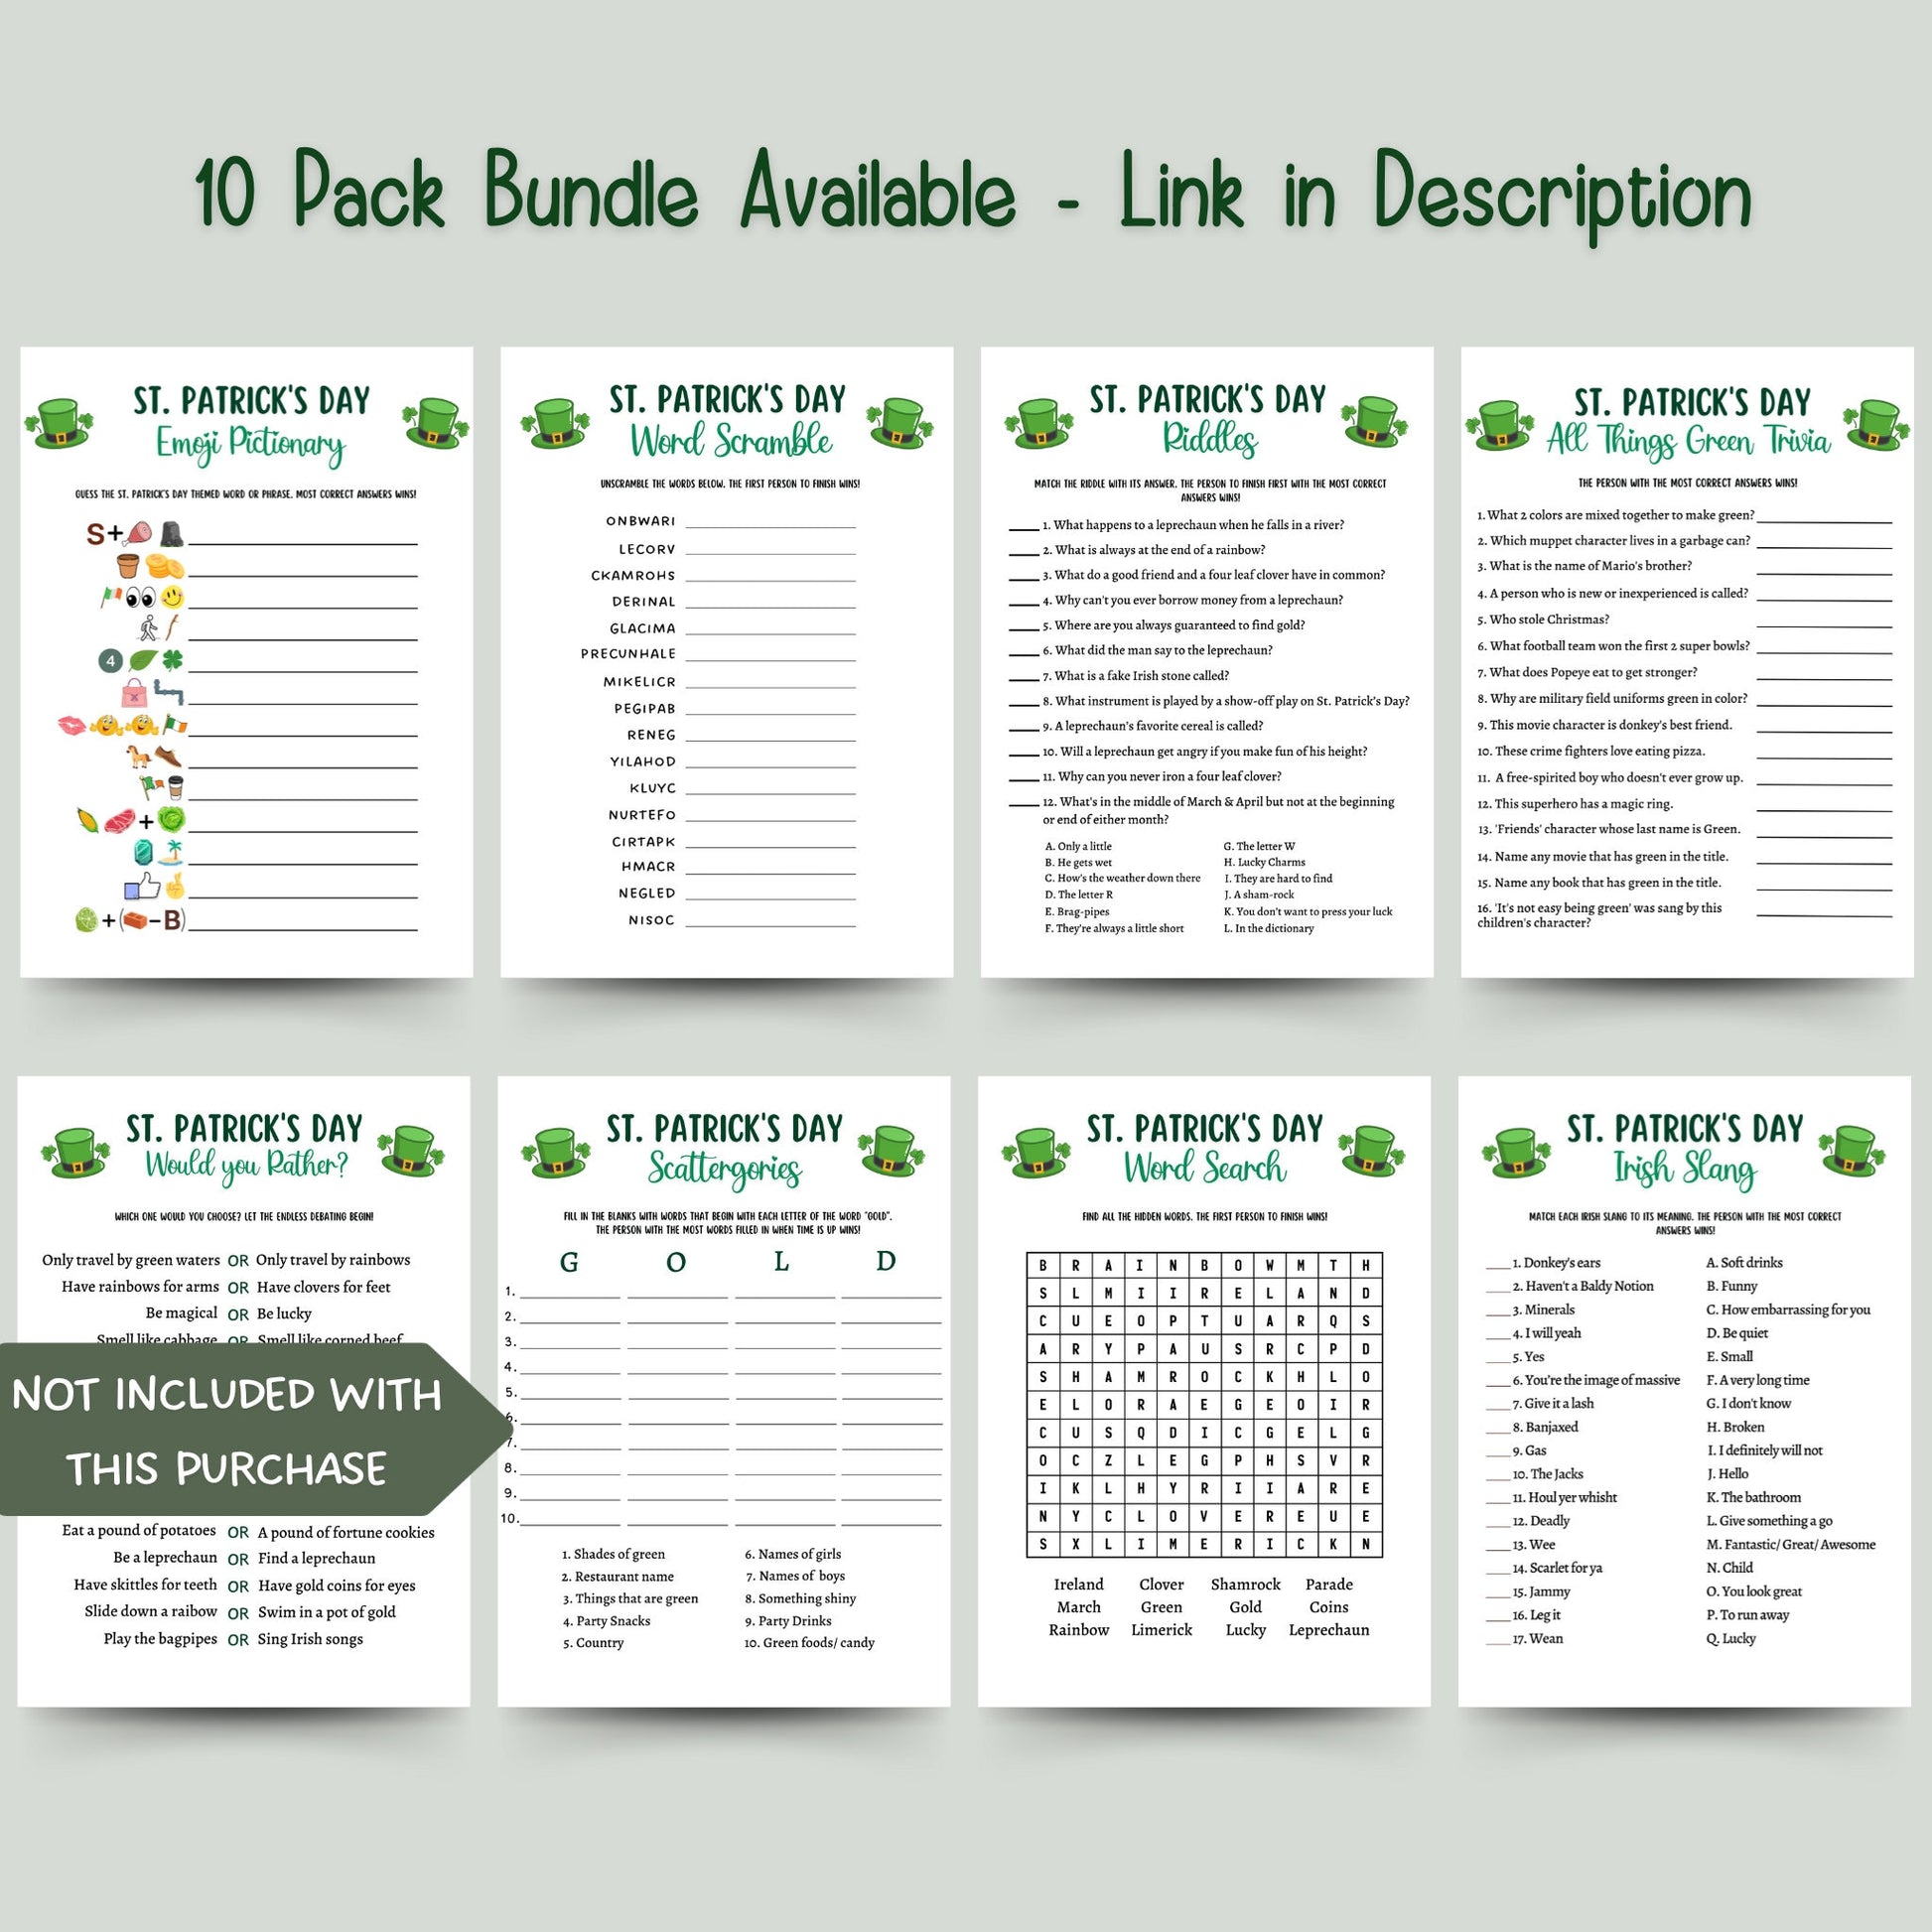 St. Patrick's Day Green Trivia Game Printable, All Things Green Activity Game, St Patricks Games for Kids, St Patty's Day Party Games Adults